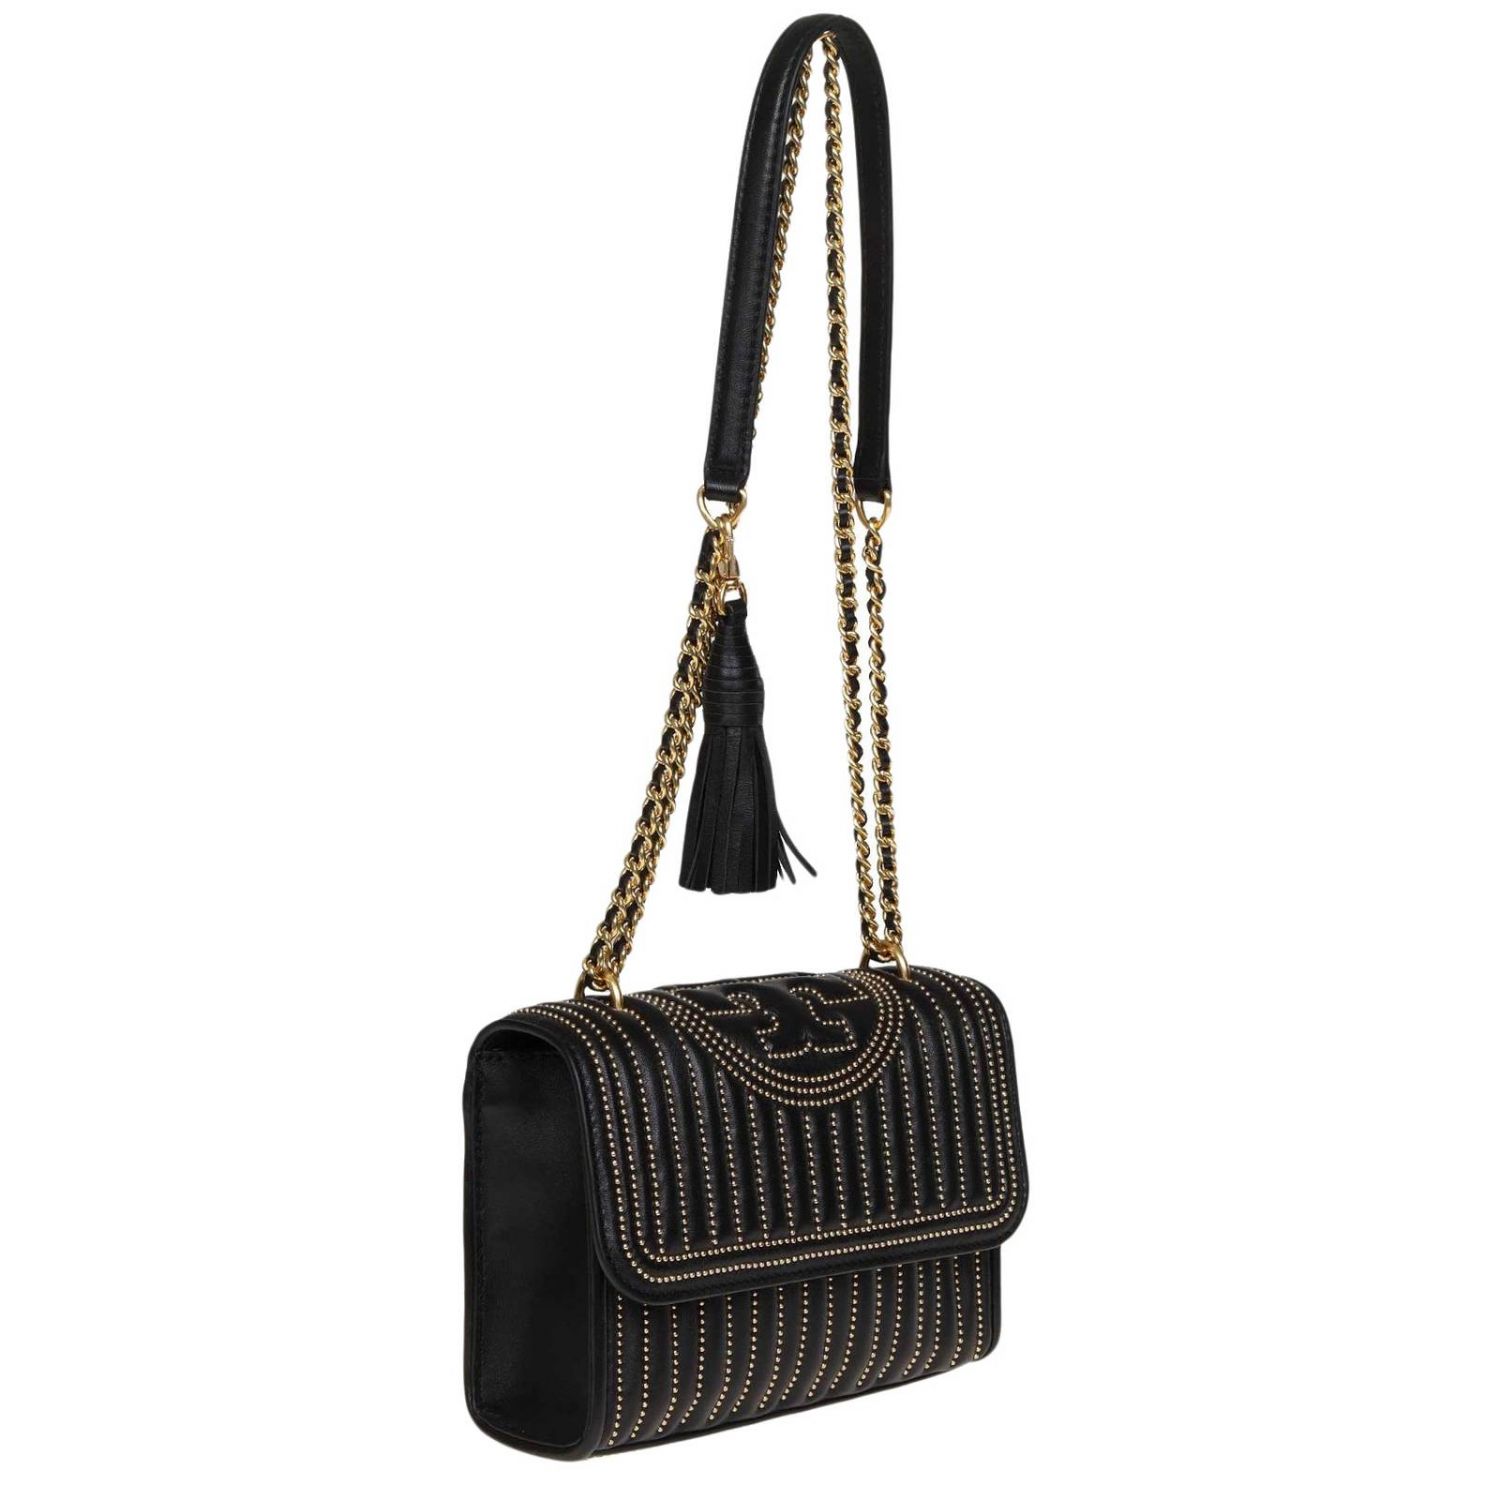 Tory Burch Outlet: crossbody bags for women - Black | Tory Burch ...